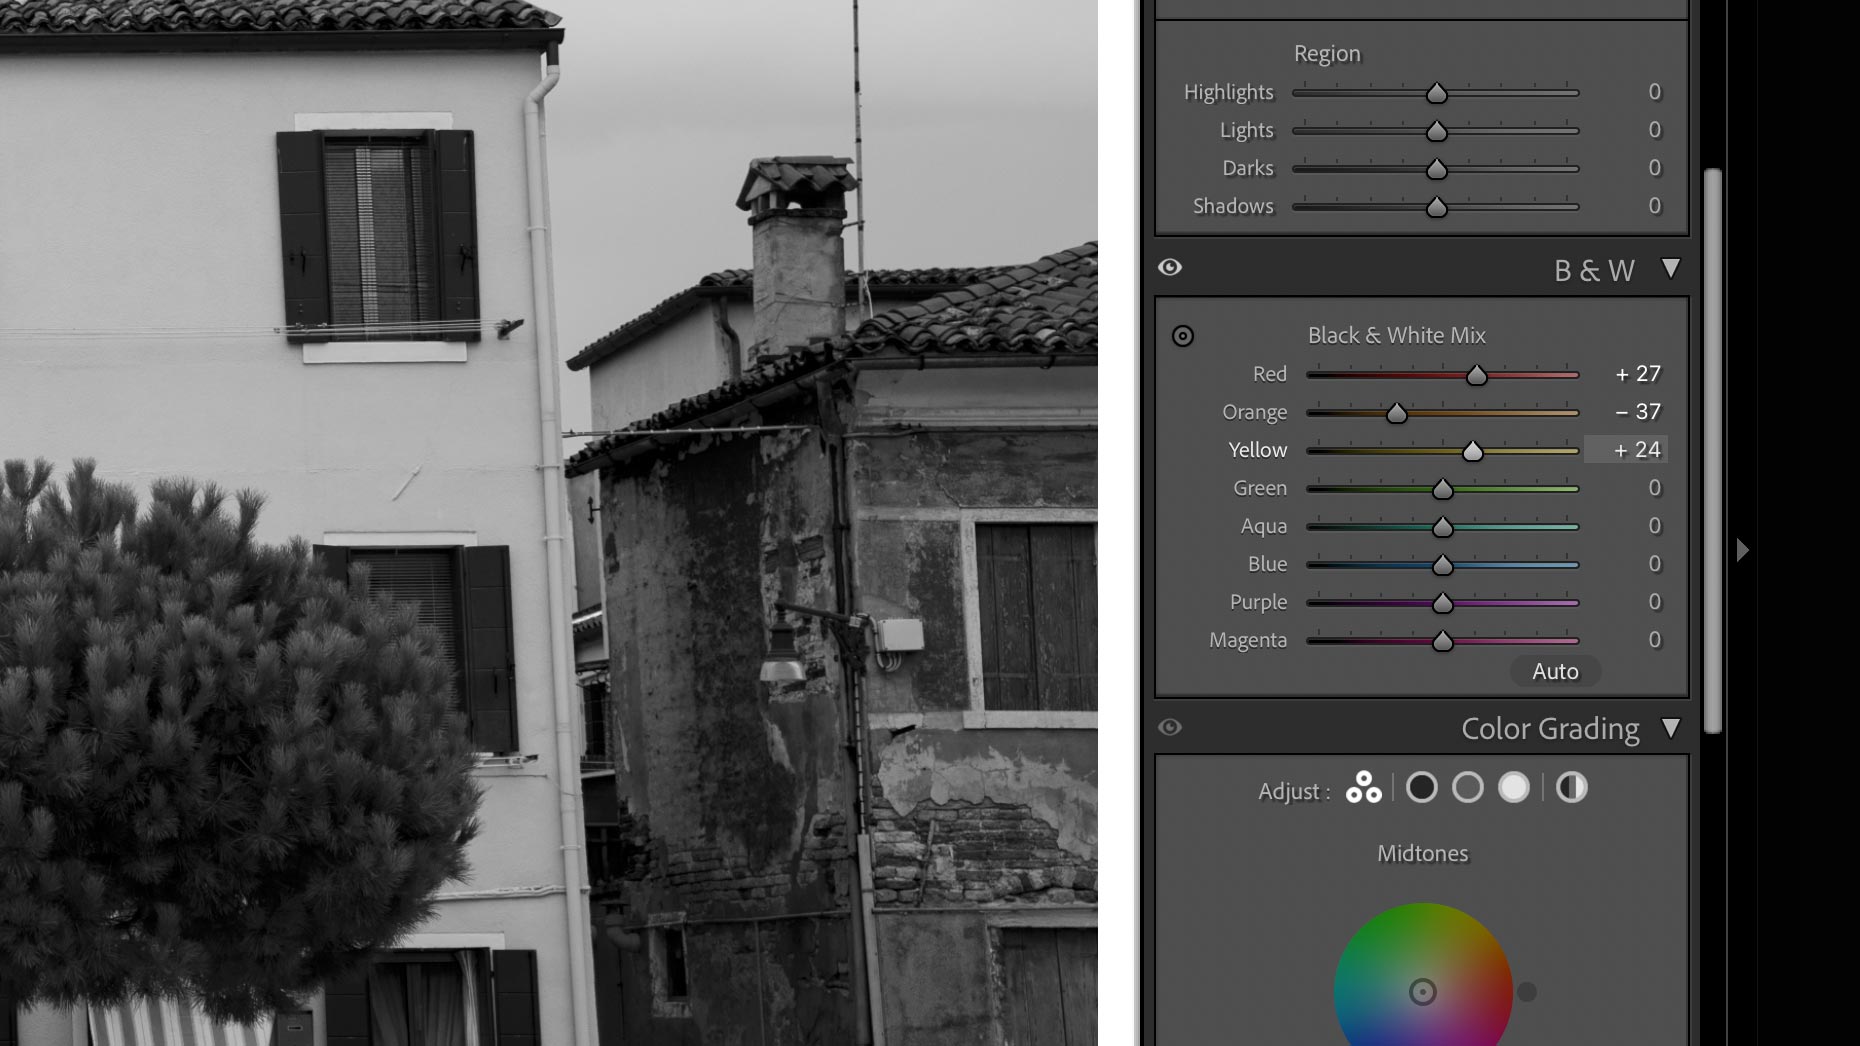 Black and White Mix panel in Adobe Lightroom